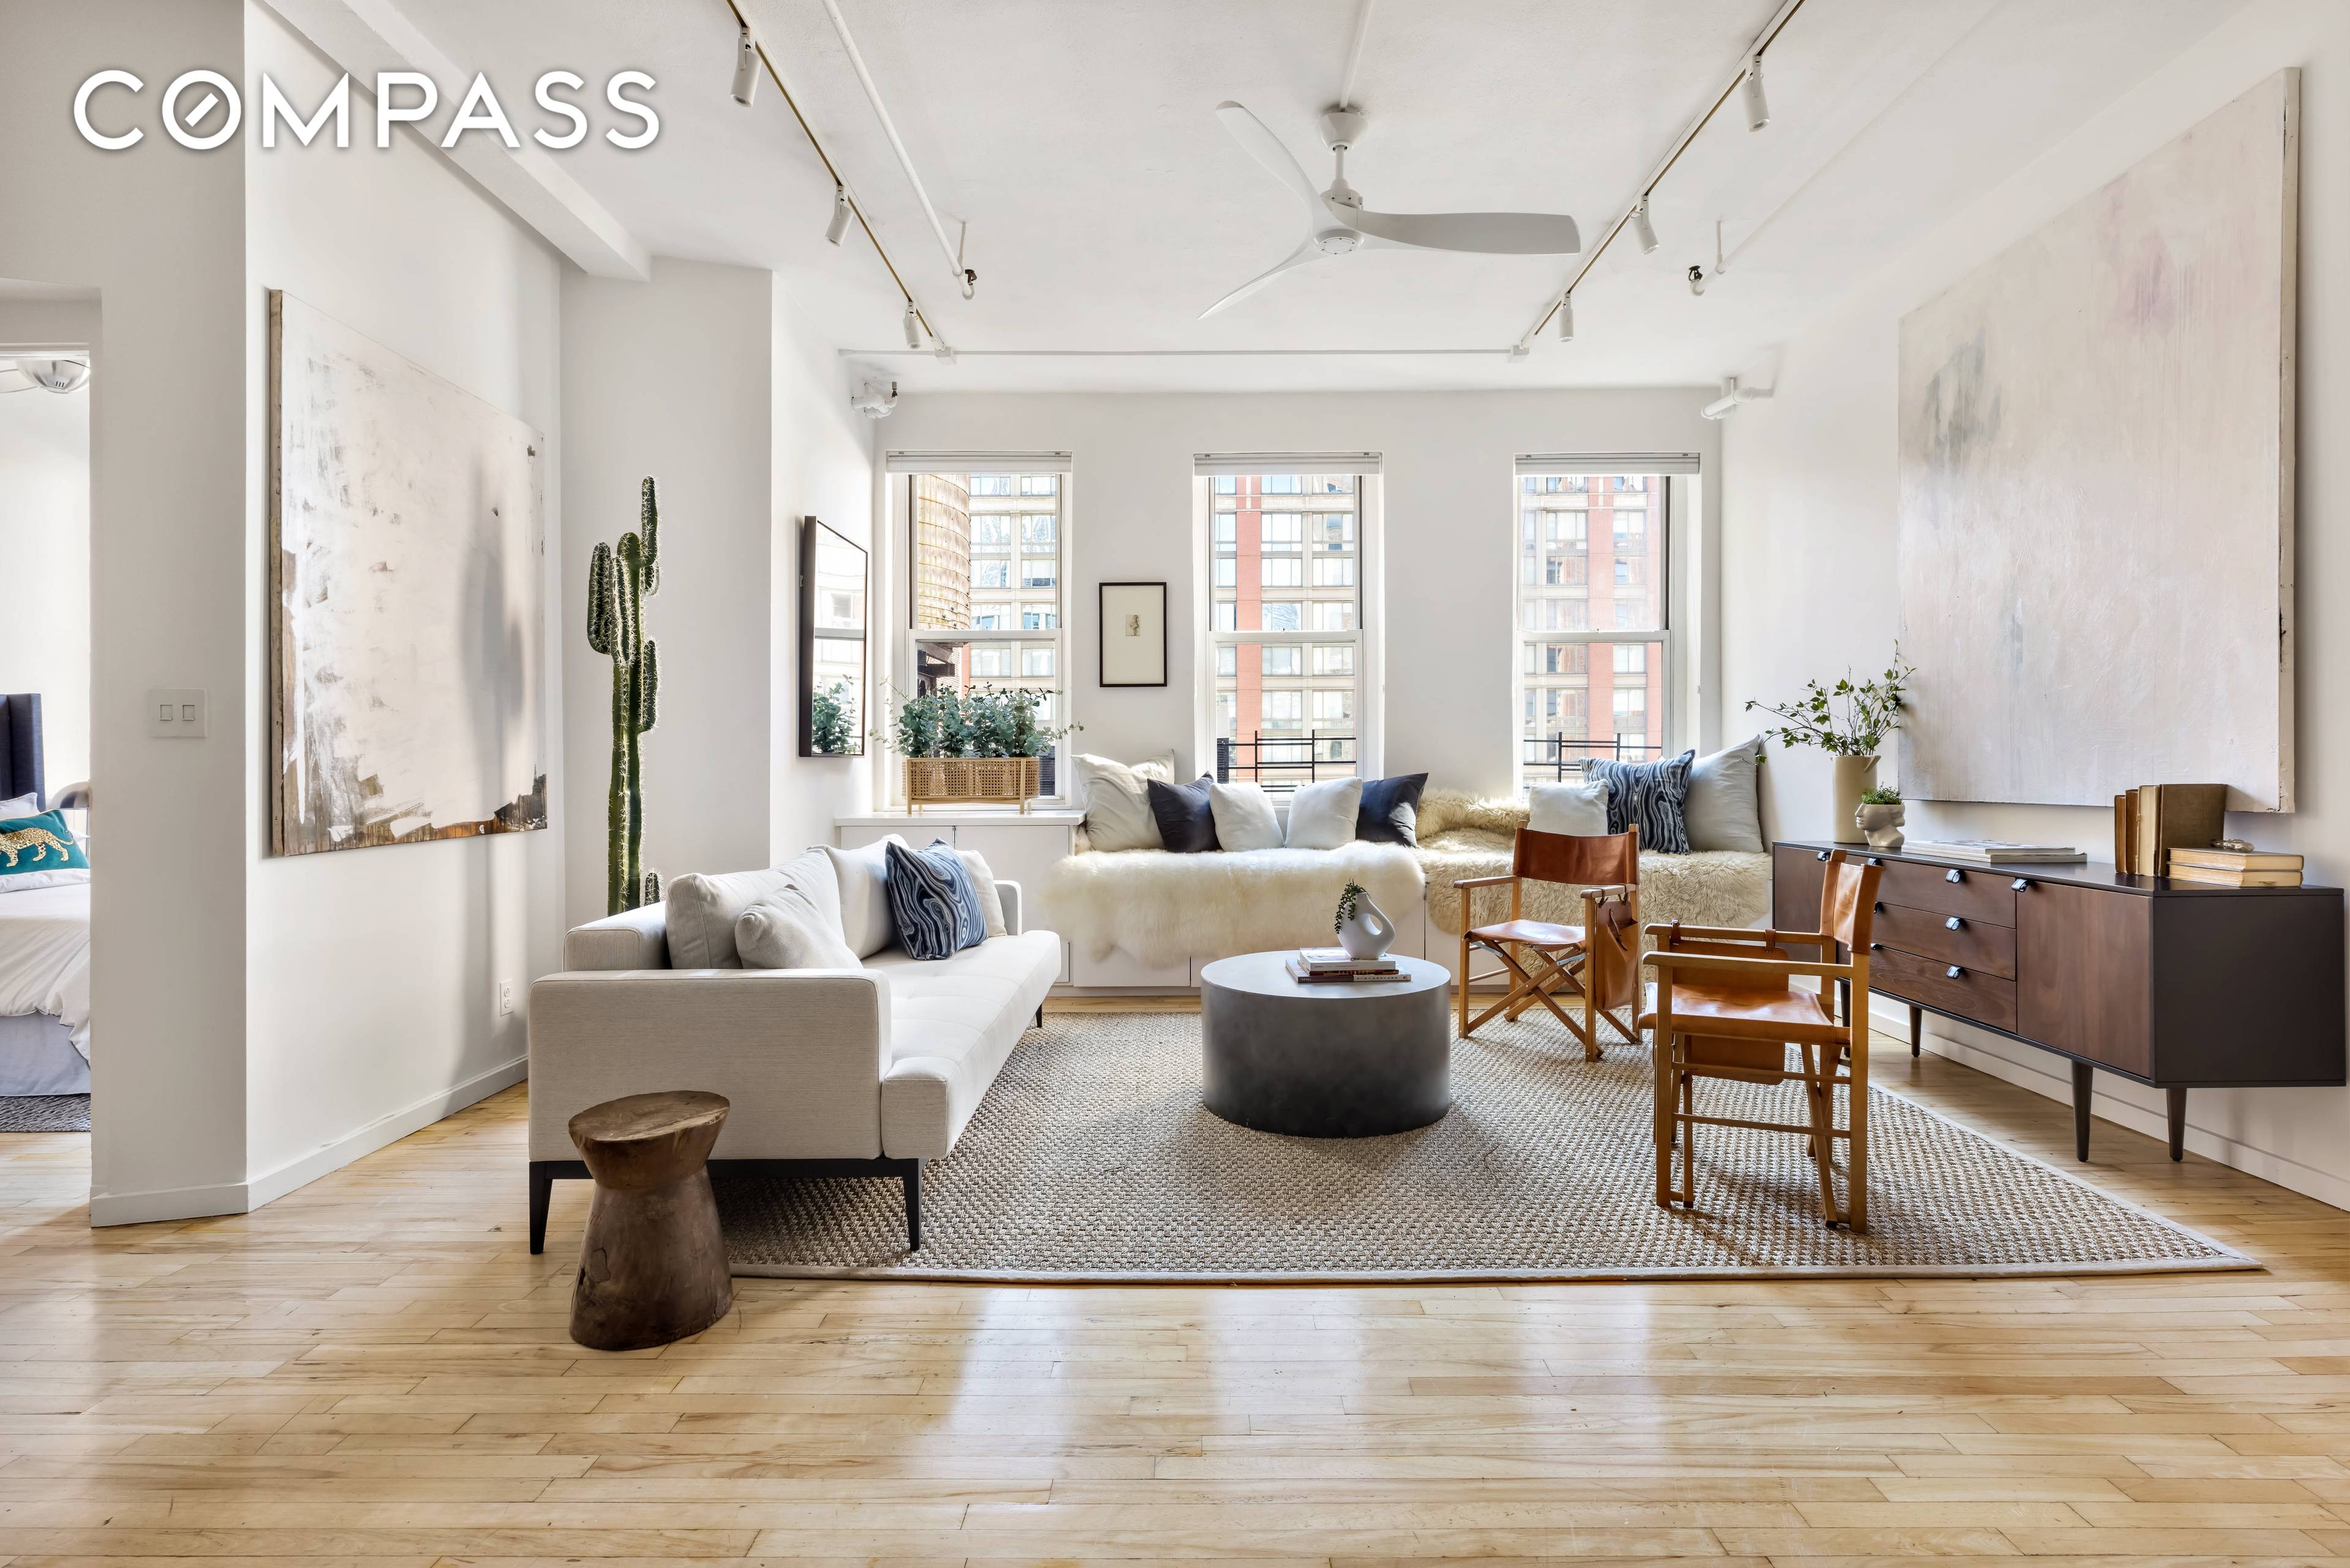 Welcome home to this quintessential New York City loft with 3 true bedrooms plus a home office.